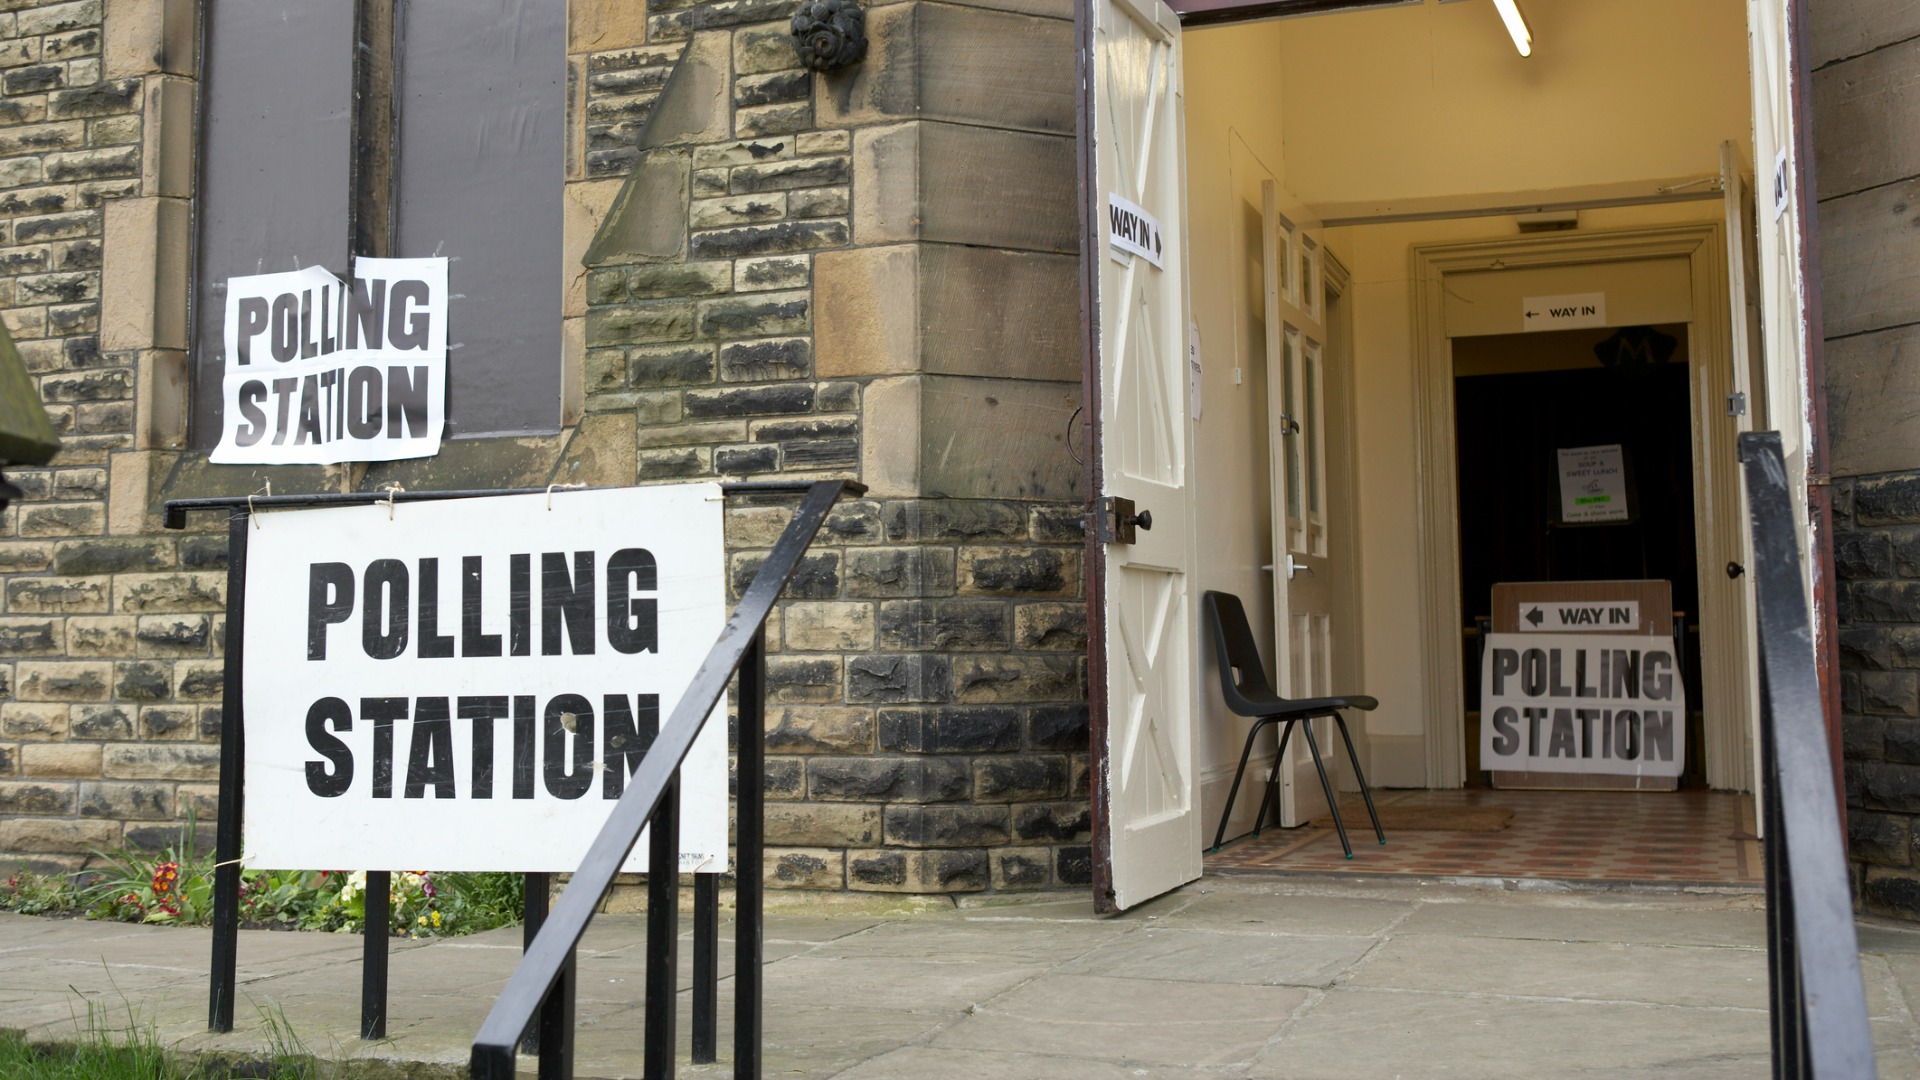 A general election is set to take place in the next year.